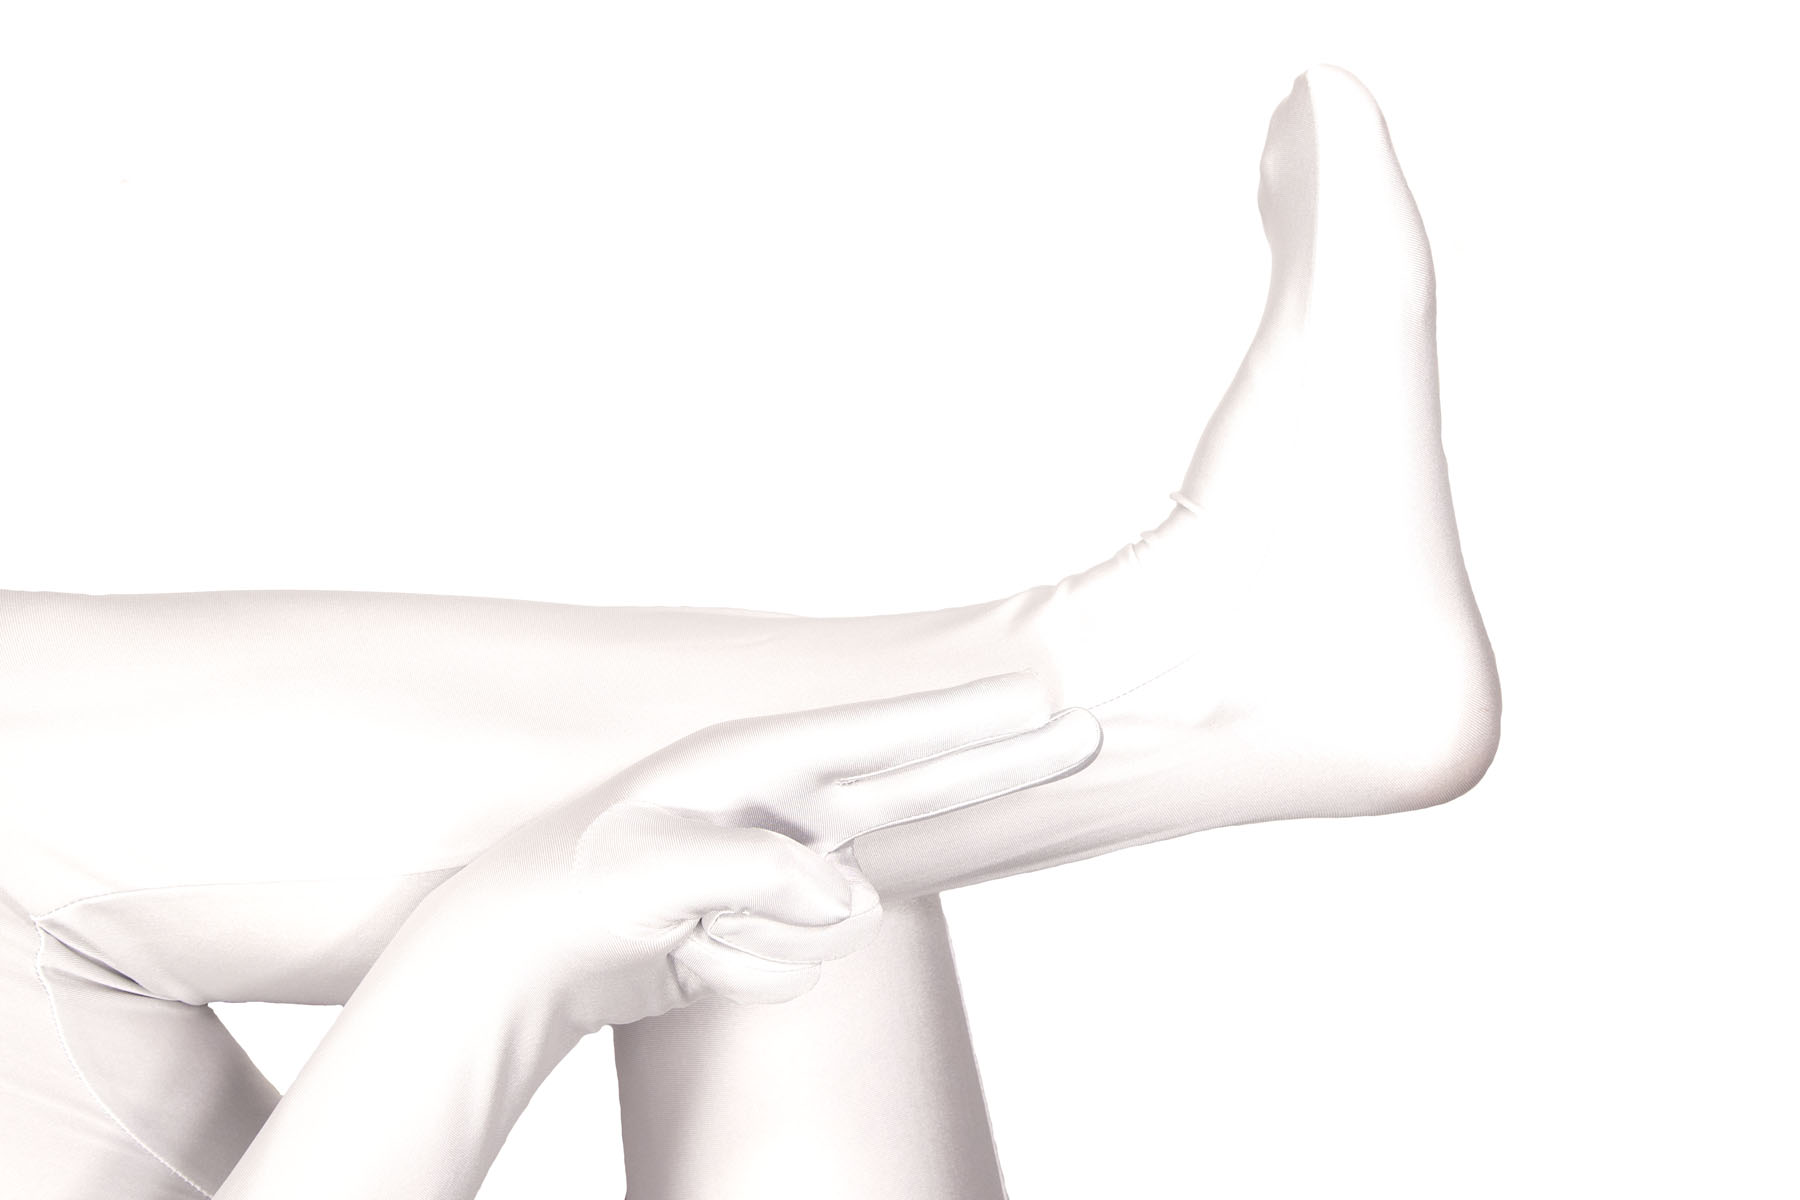 A seated person in a white bodysuit has crossed their left ankle over their right knee. Their left hand lies on top of the ankle, palm up. The index and middle fingers are extended, and the ring and pinkie fingers are folded.